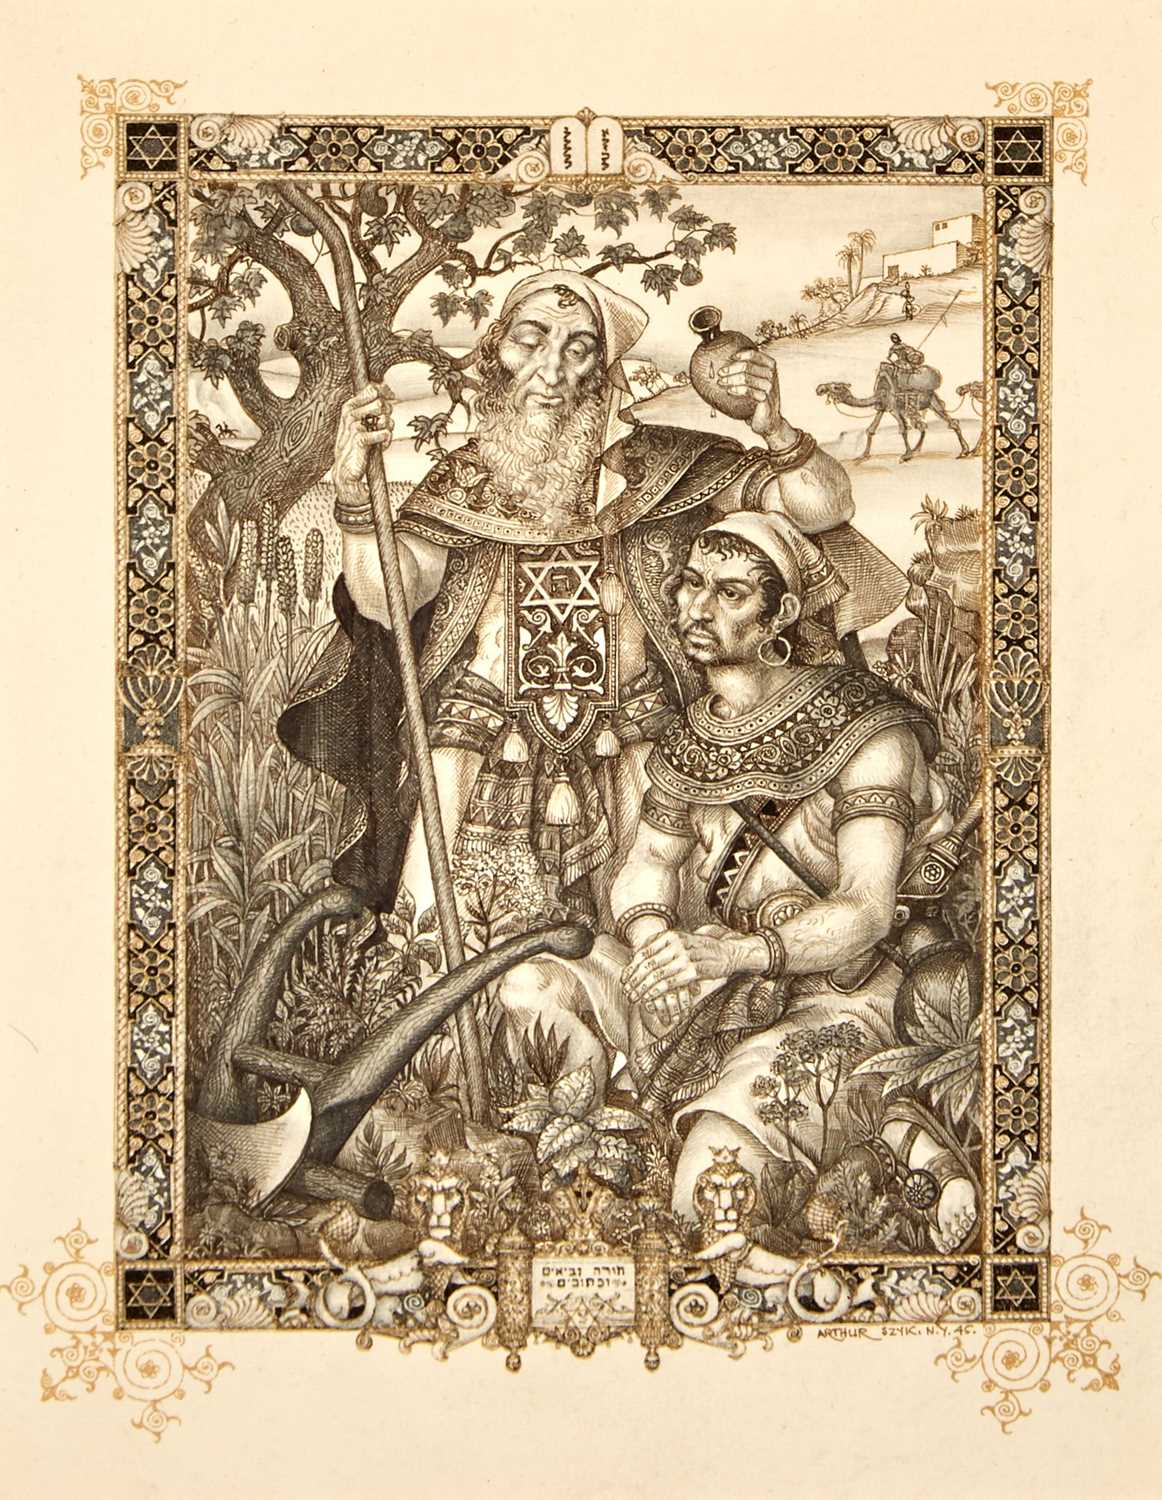 Lot 331 - Original pen and ink drawing for Samuel & Saul by Arthur Szyk